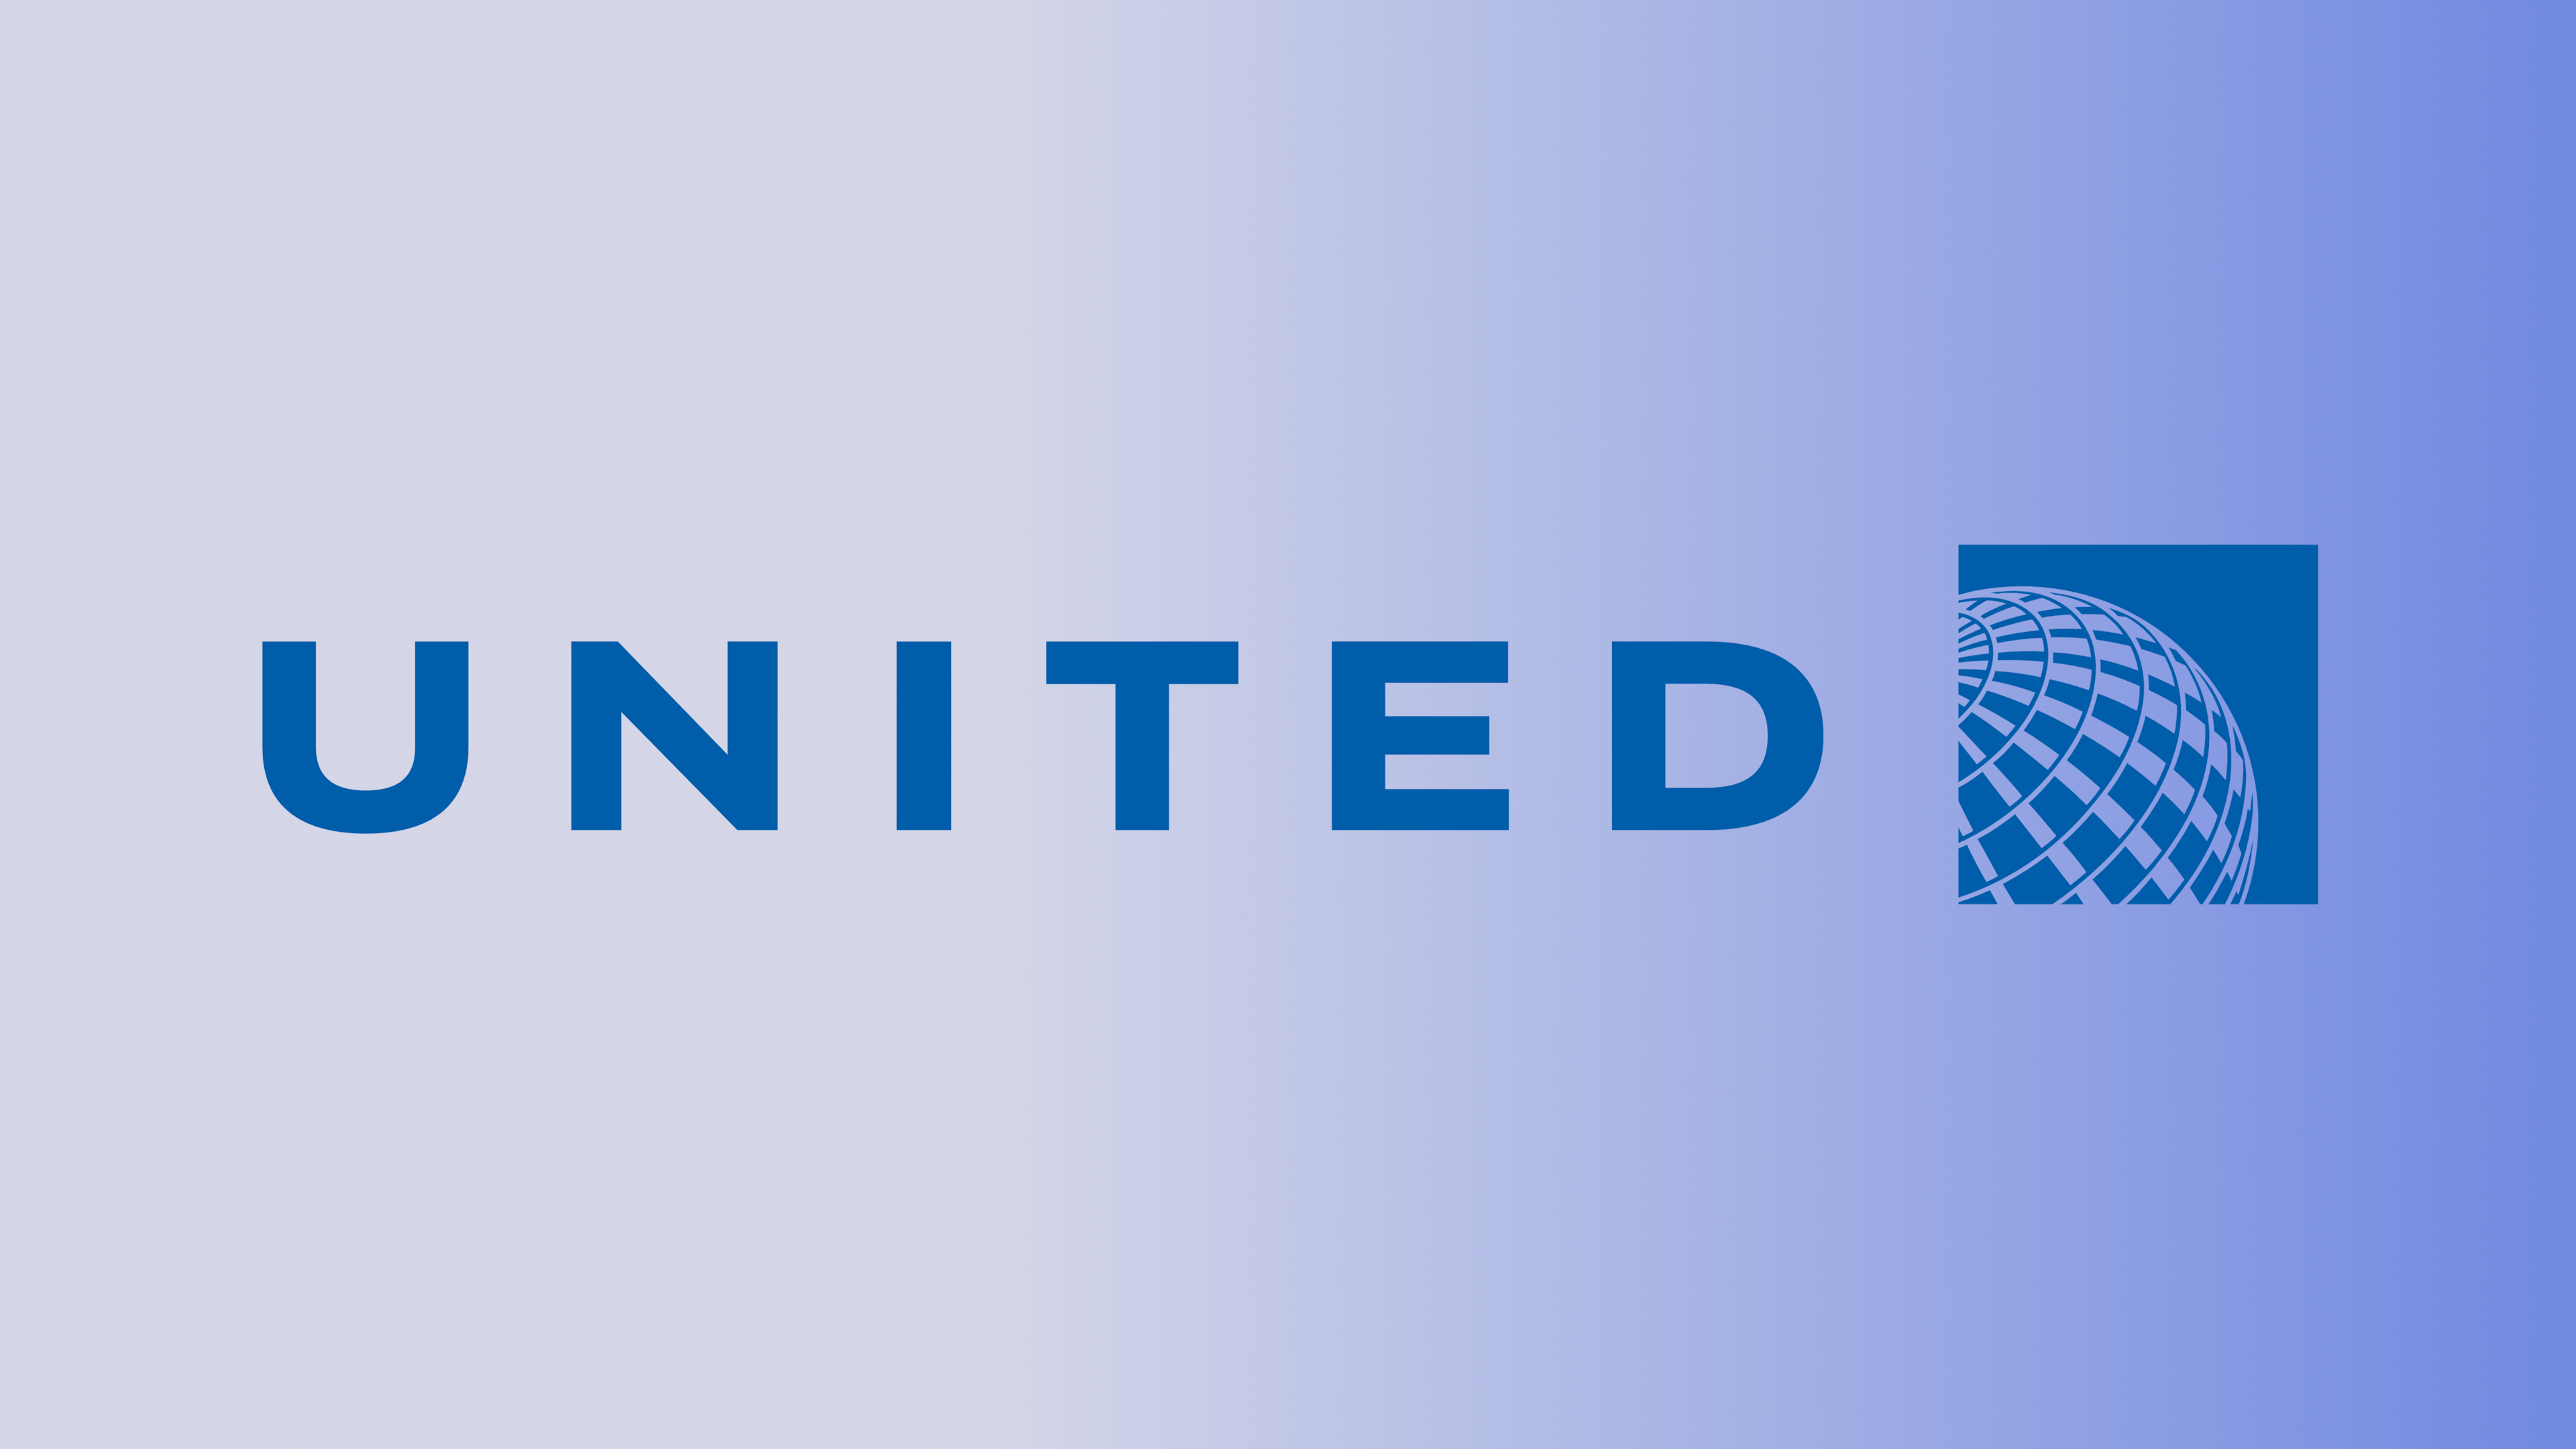 United airlines logo